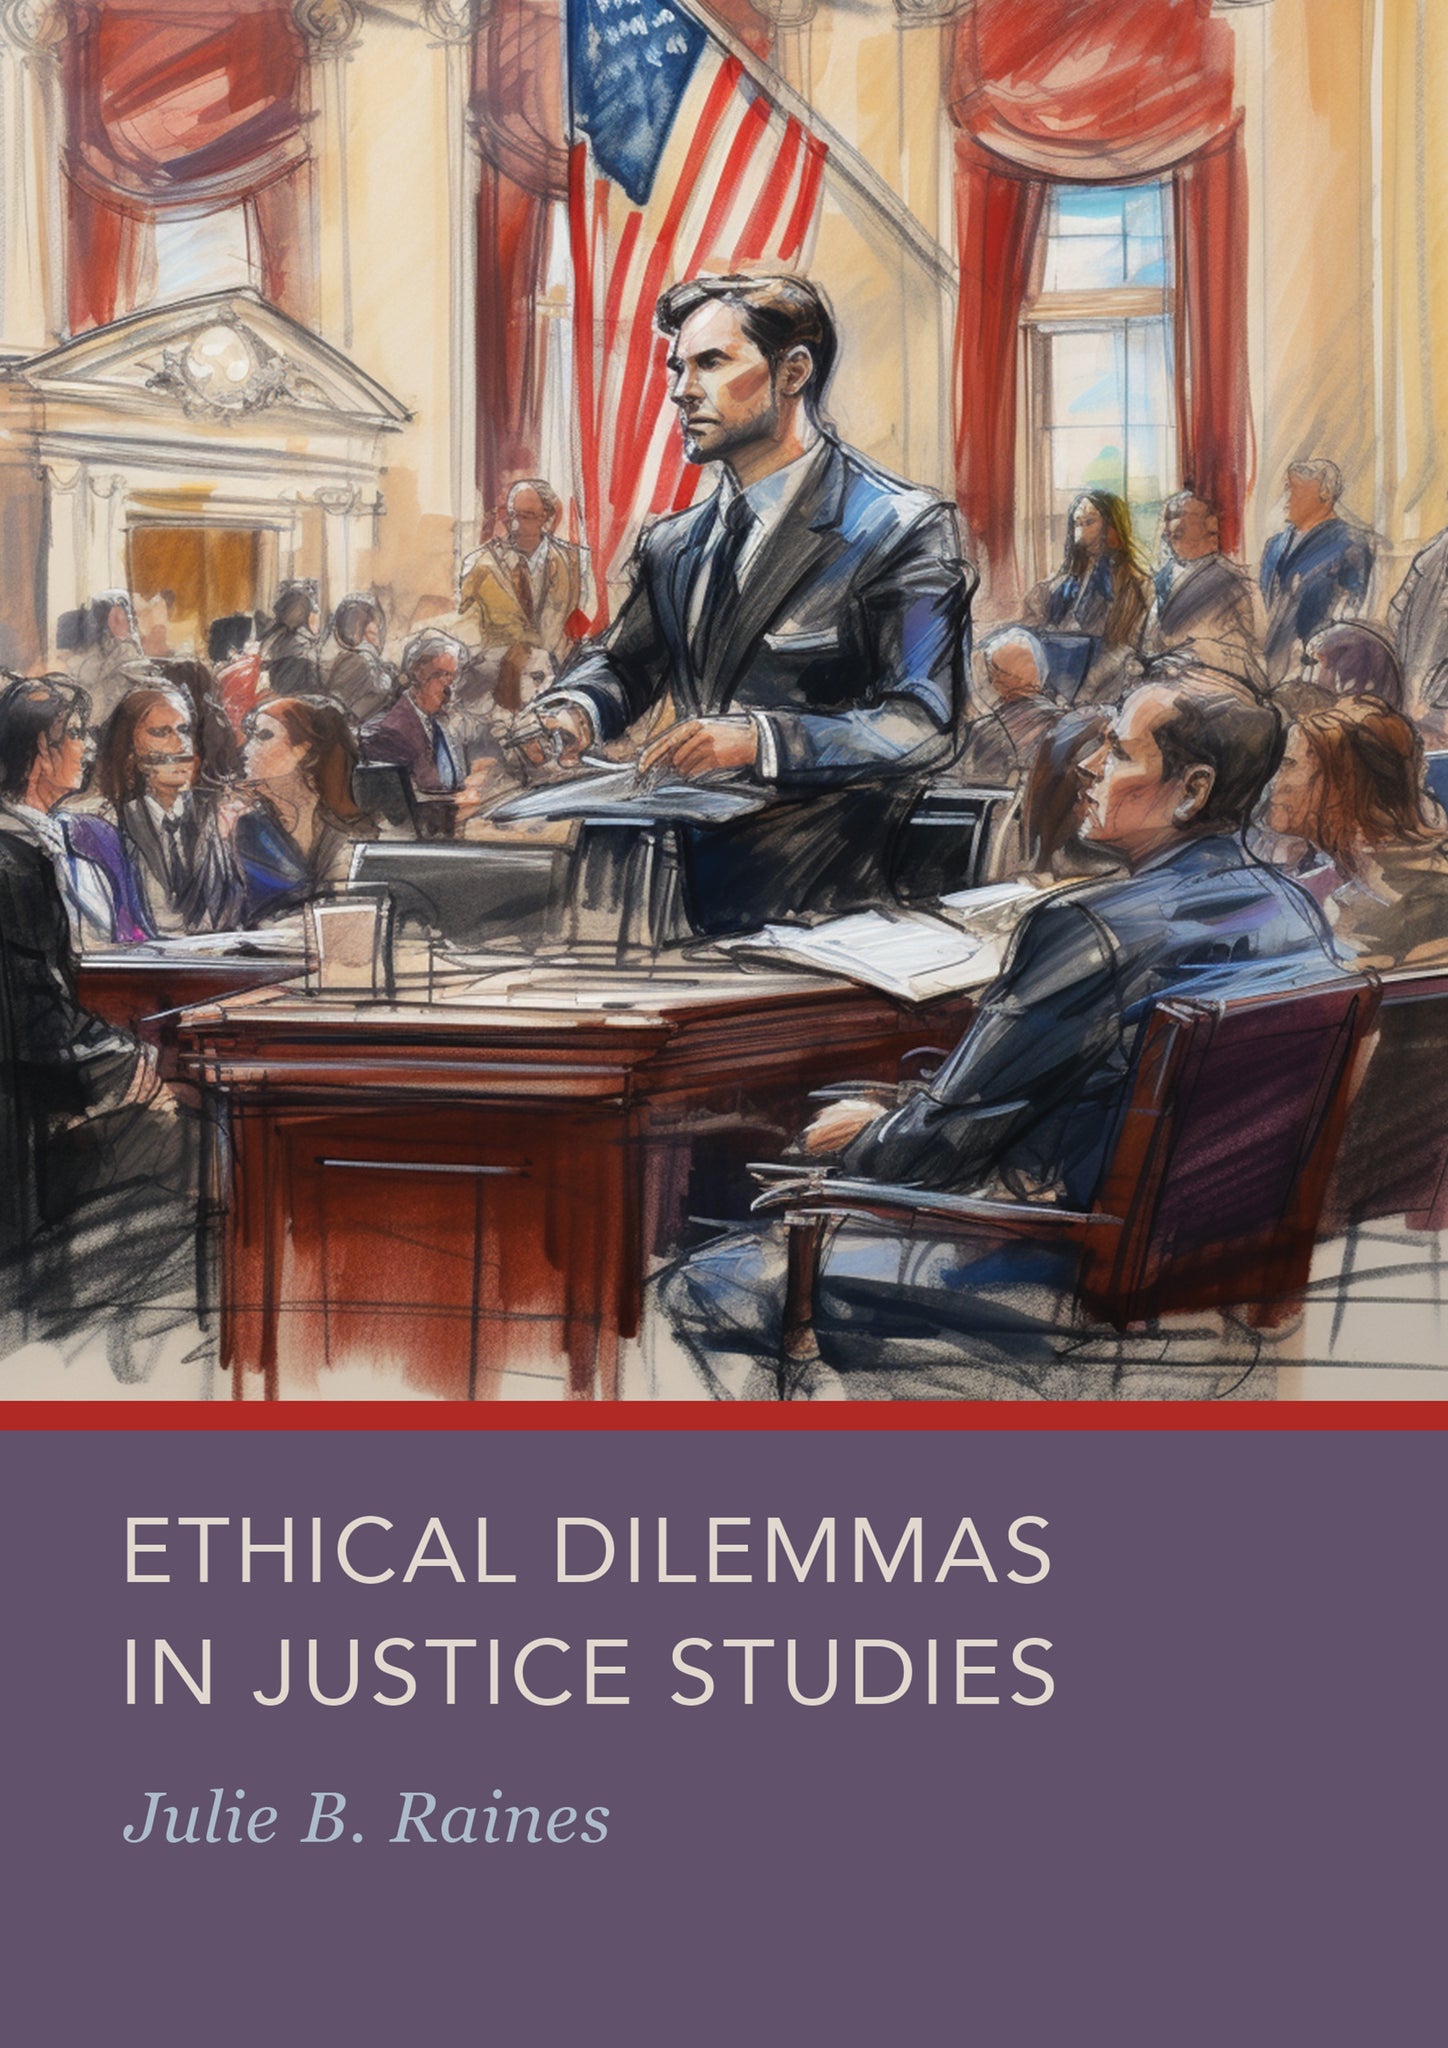 Ethical Dilemmas in Justice Studies